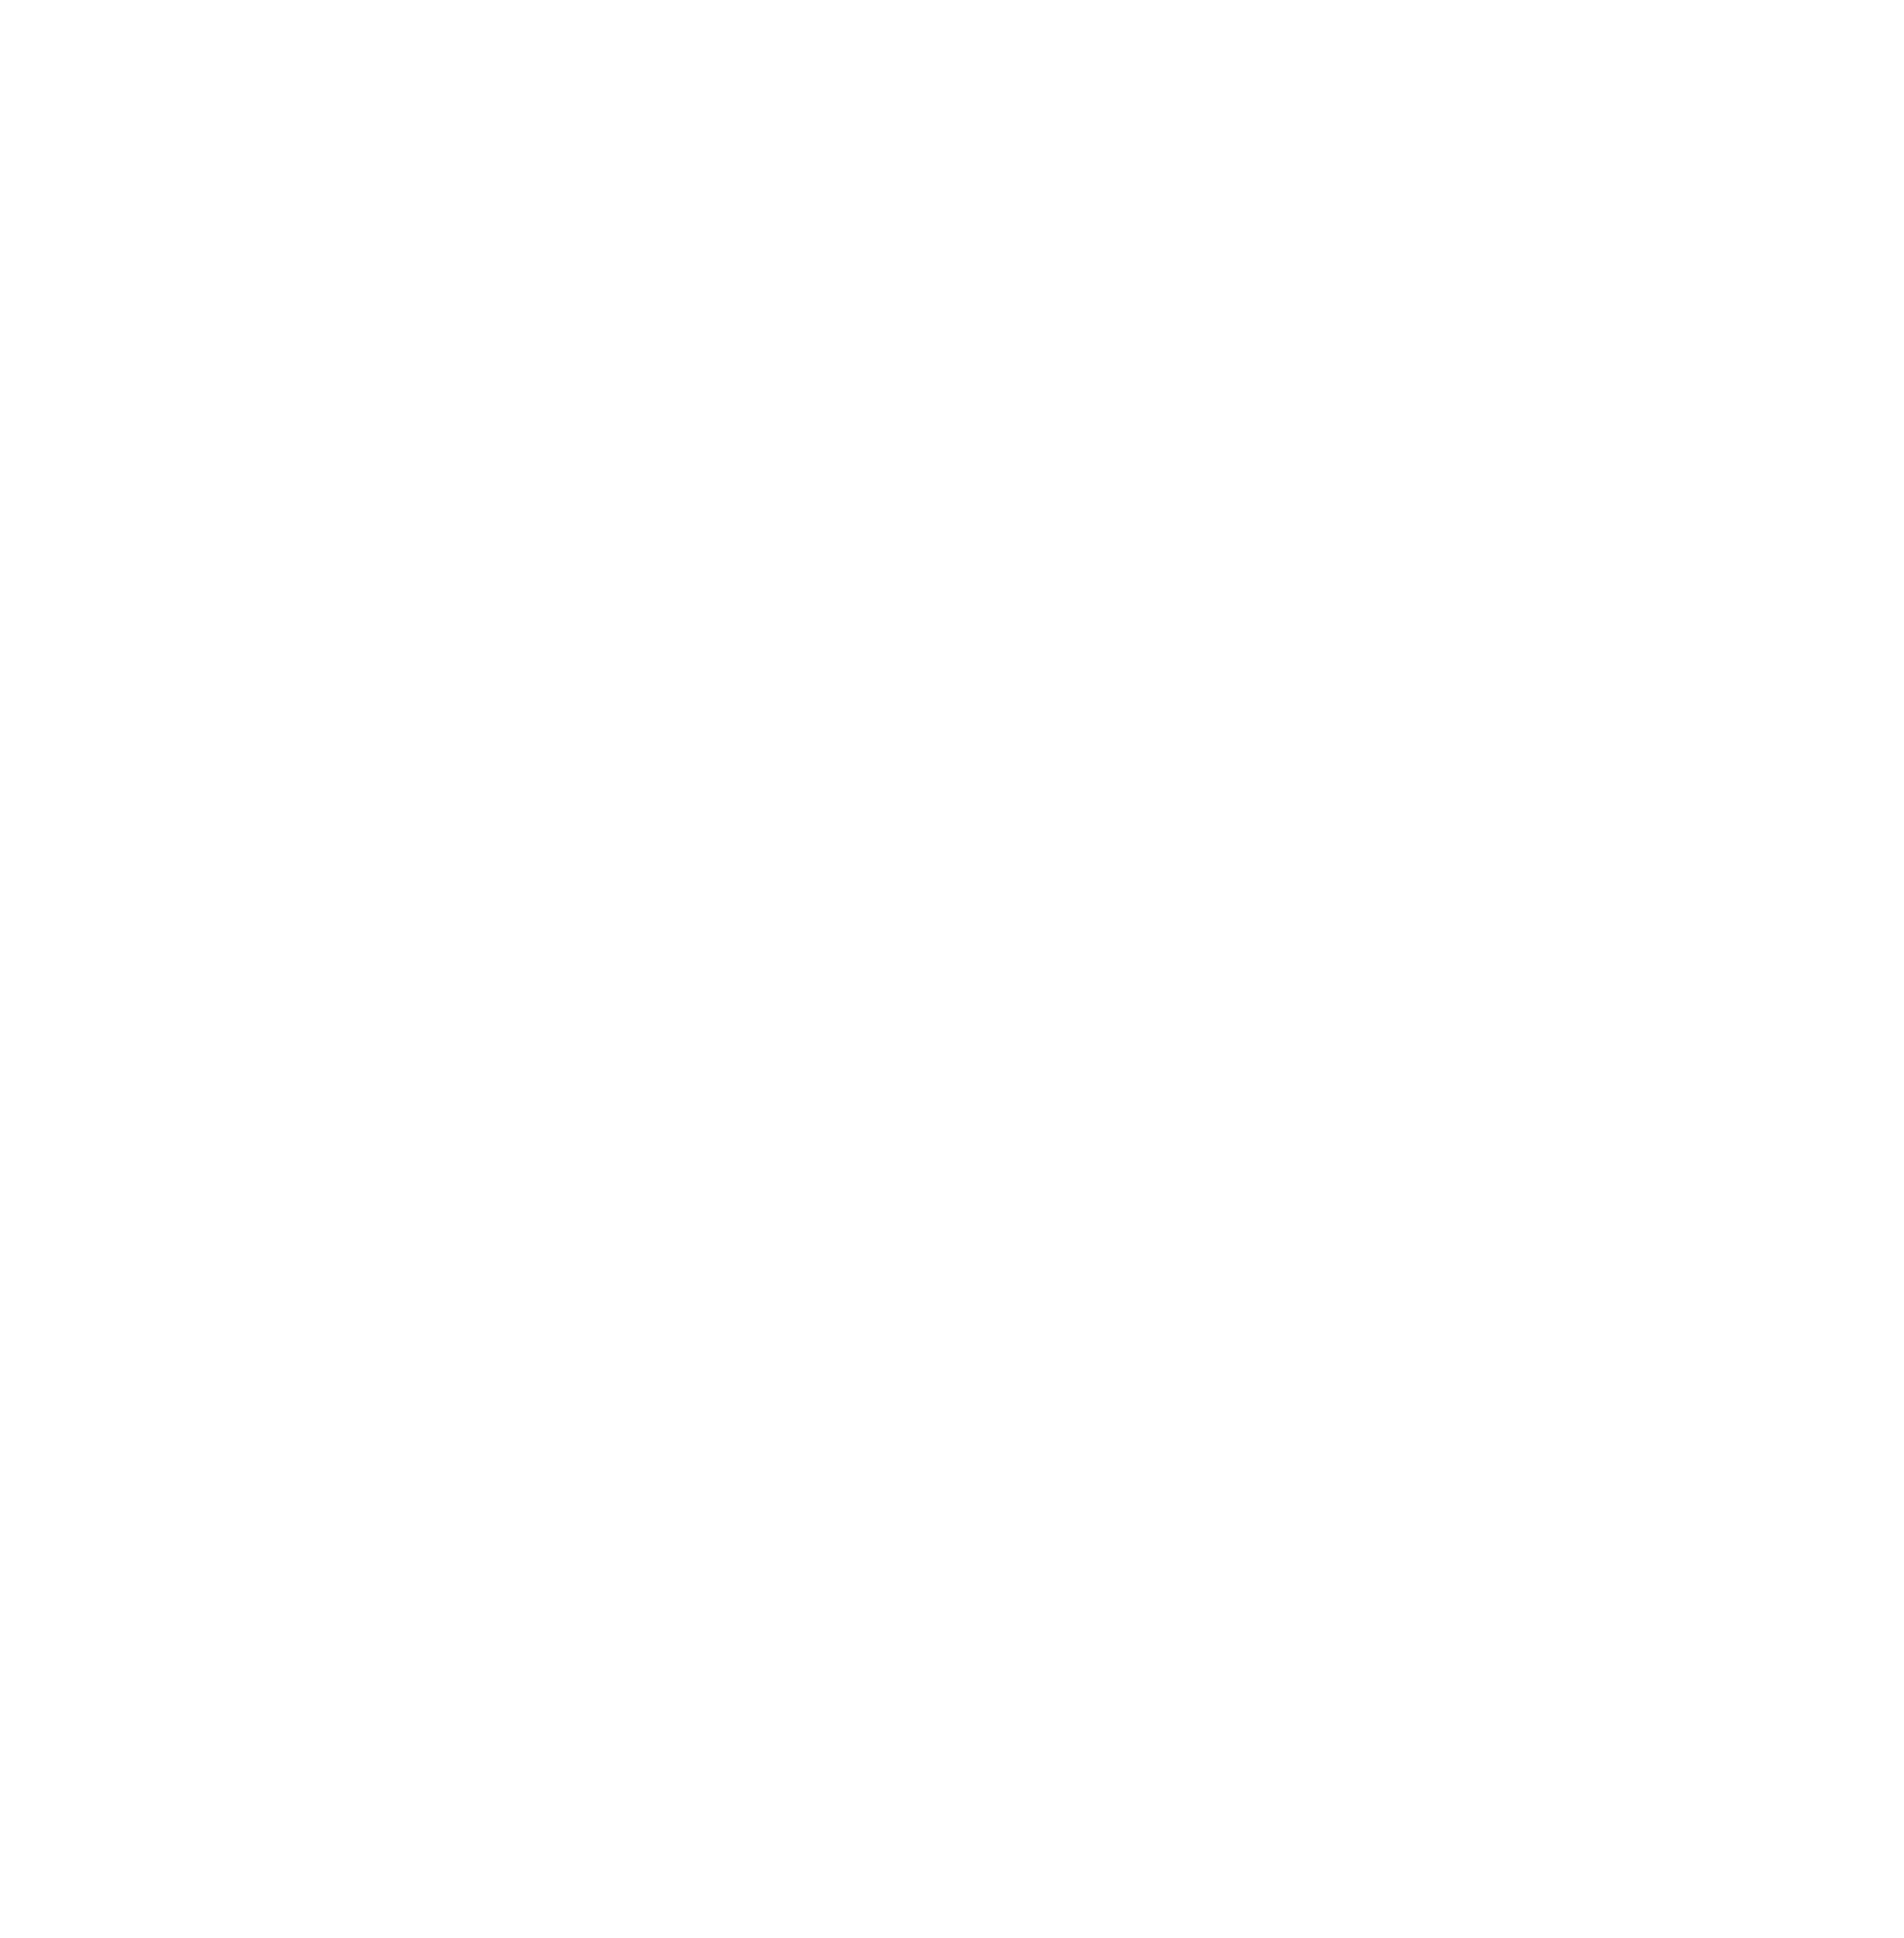 Perspective Counseling Services logo